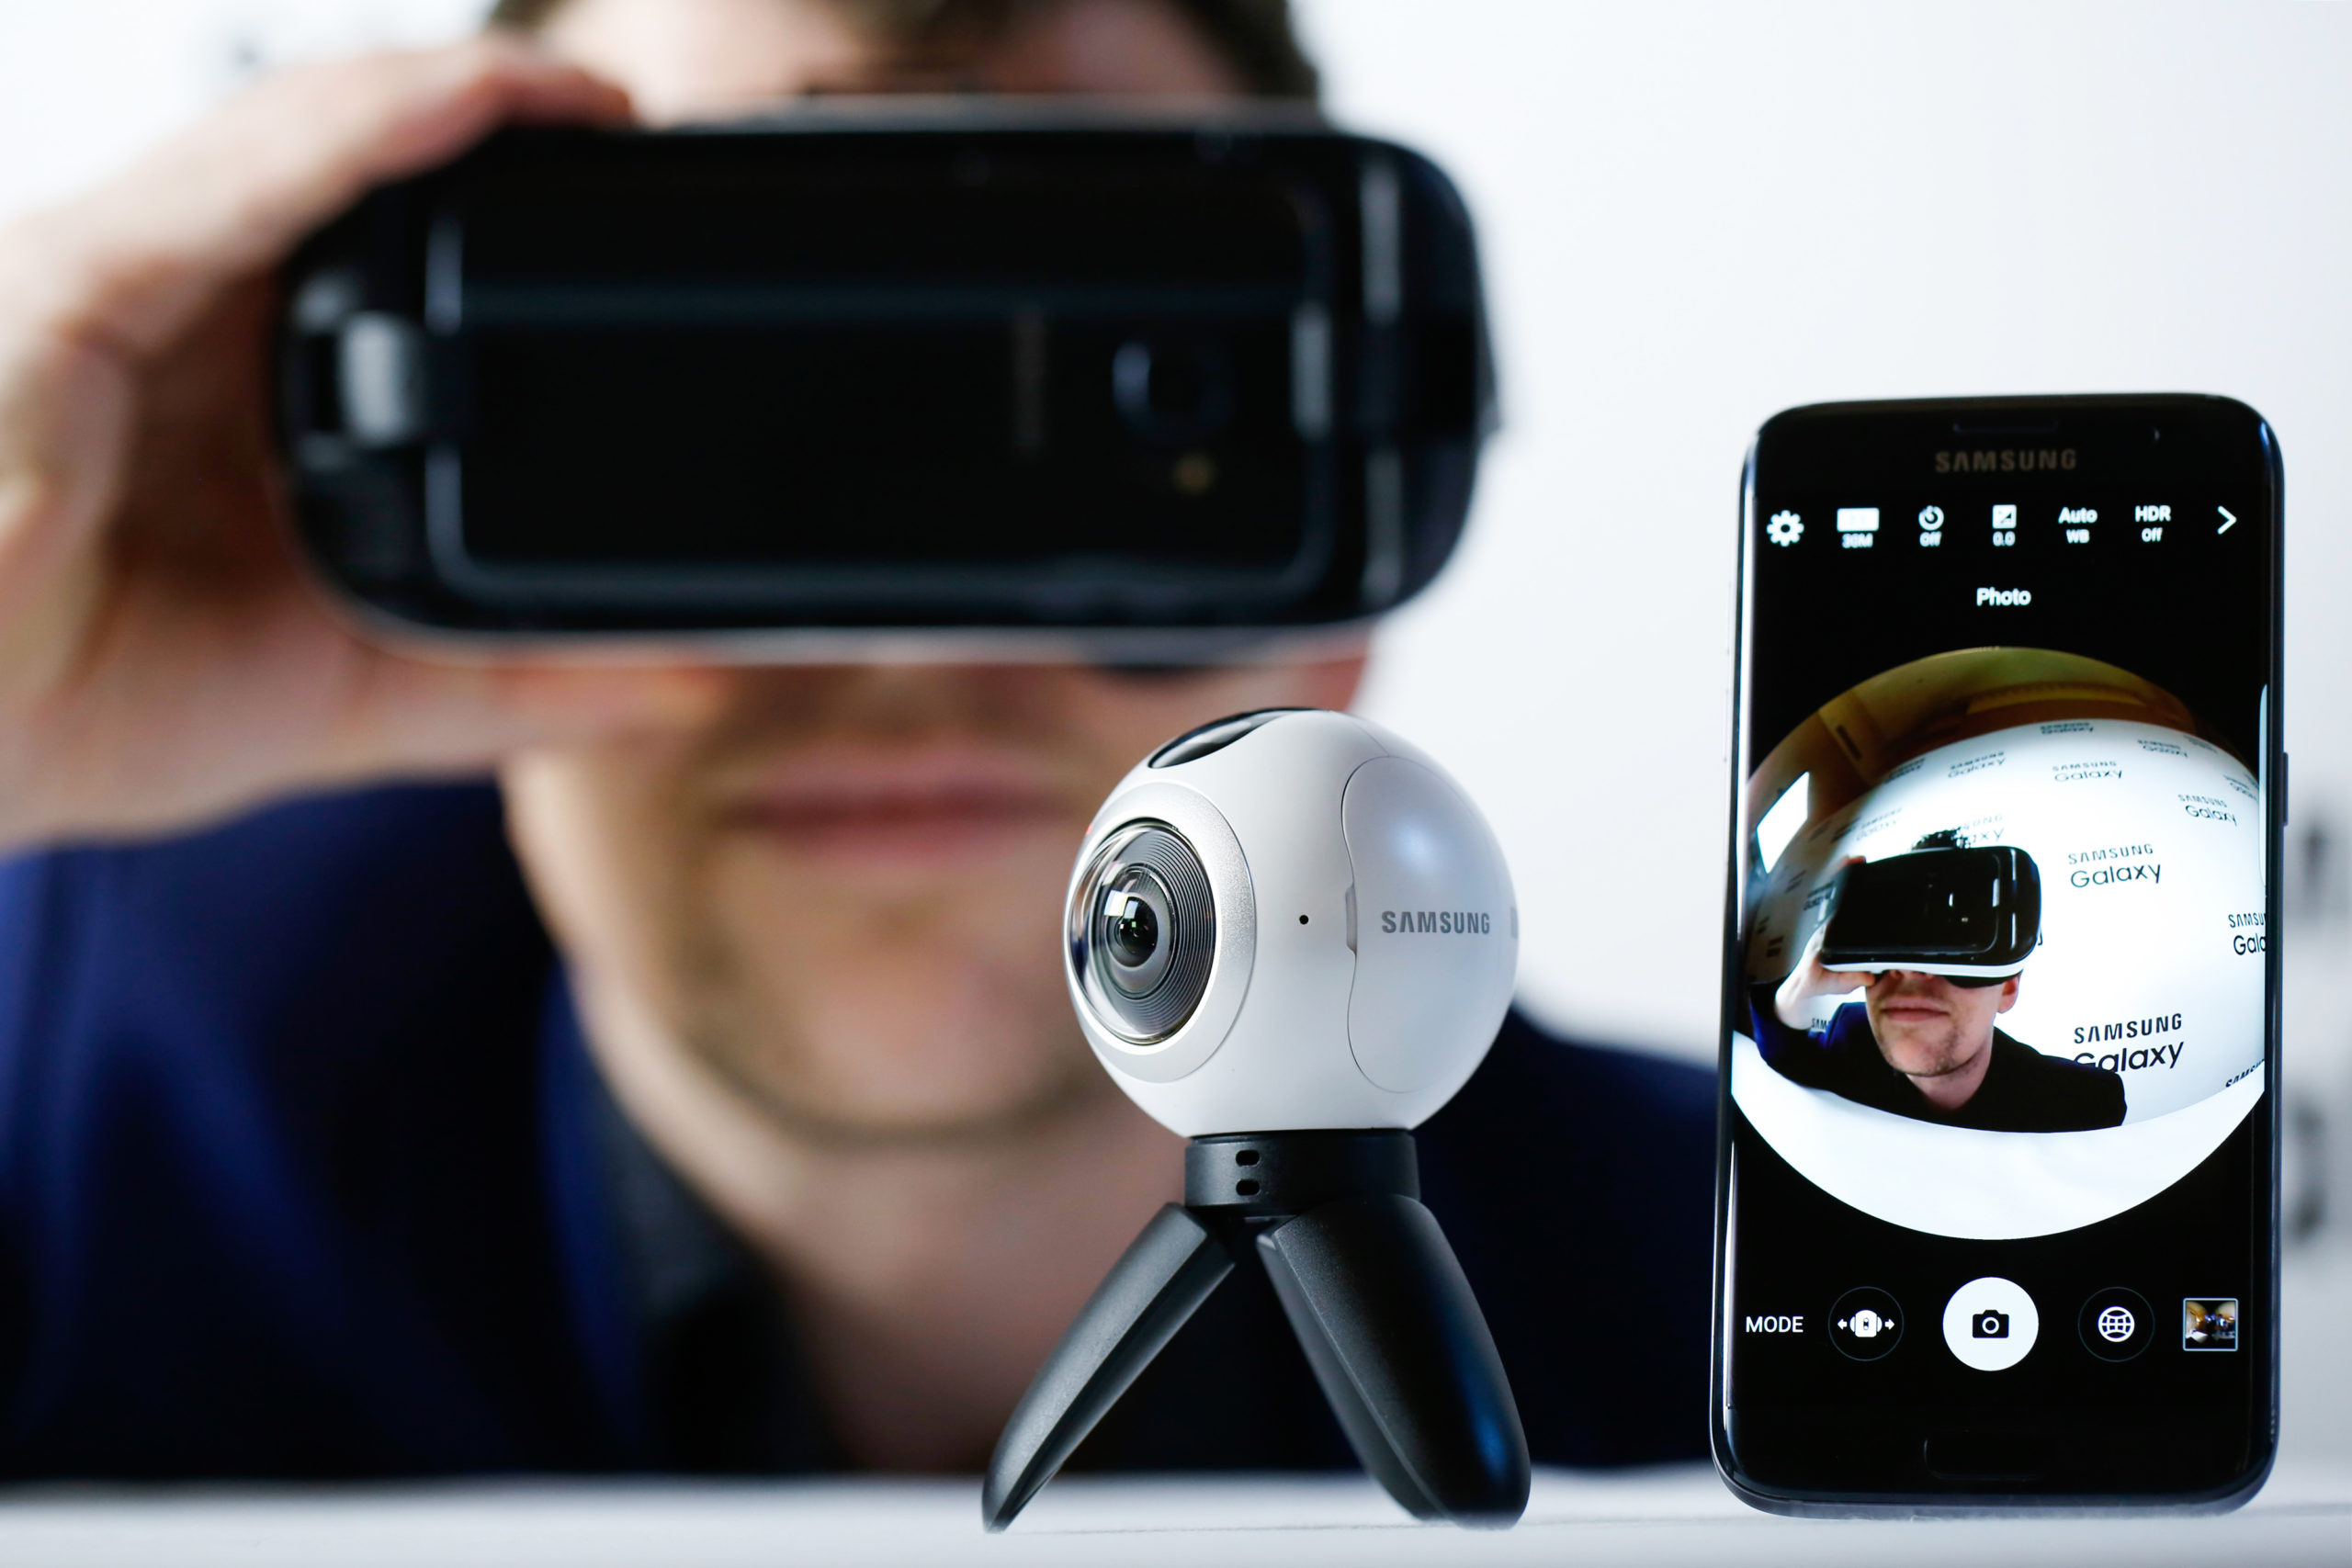 An employee demonstrates the previously released Samsung Electronics Co. Gear VR, left, in combination with the new Samsung Gear 360, video camera, centre, as it sends 360 degree footage to the Samsung Galaxy S7 edge with 3D thermo forming in this arranged photo in London, U.K., on Thursday, Feb. 18, 2016.  Samsung showed off new Galaxy S7 smartphones featuring upgraded components and the return of a popular feature missing from their predecessors, in the latest attempt to breathe life into its premium line and wrest ascendancy back from Apple Inc. Photographer: Luke MacGregor/Bloomberg